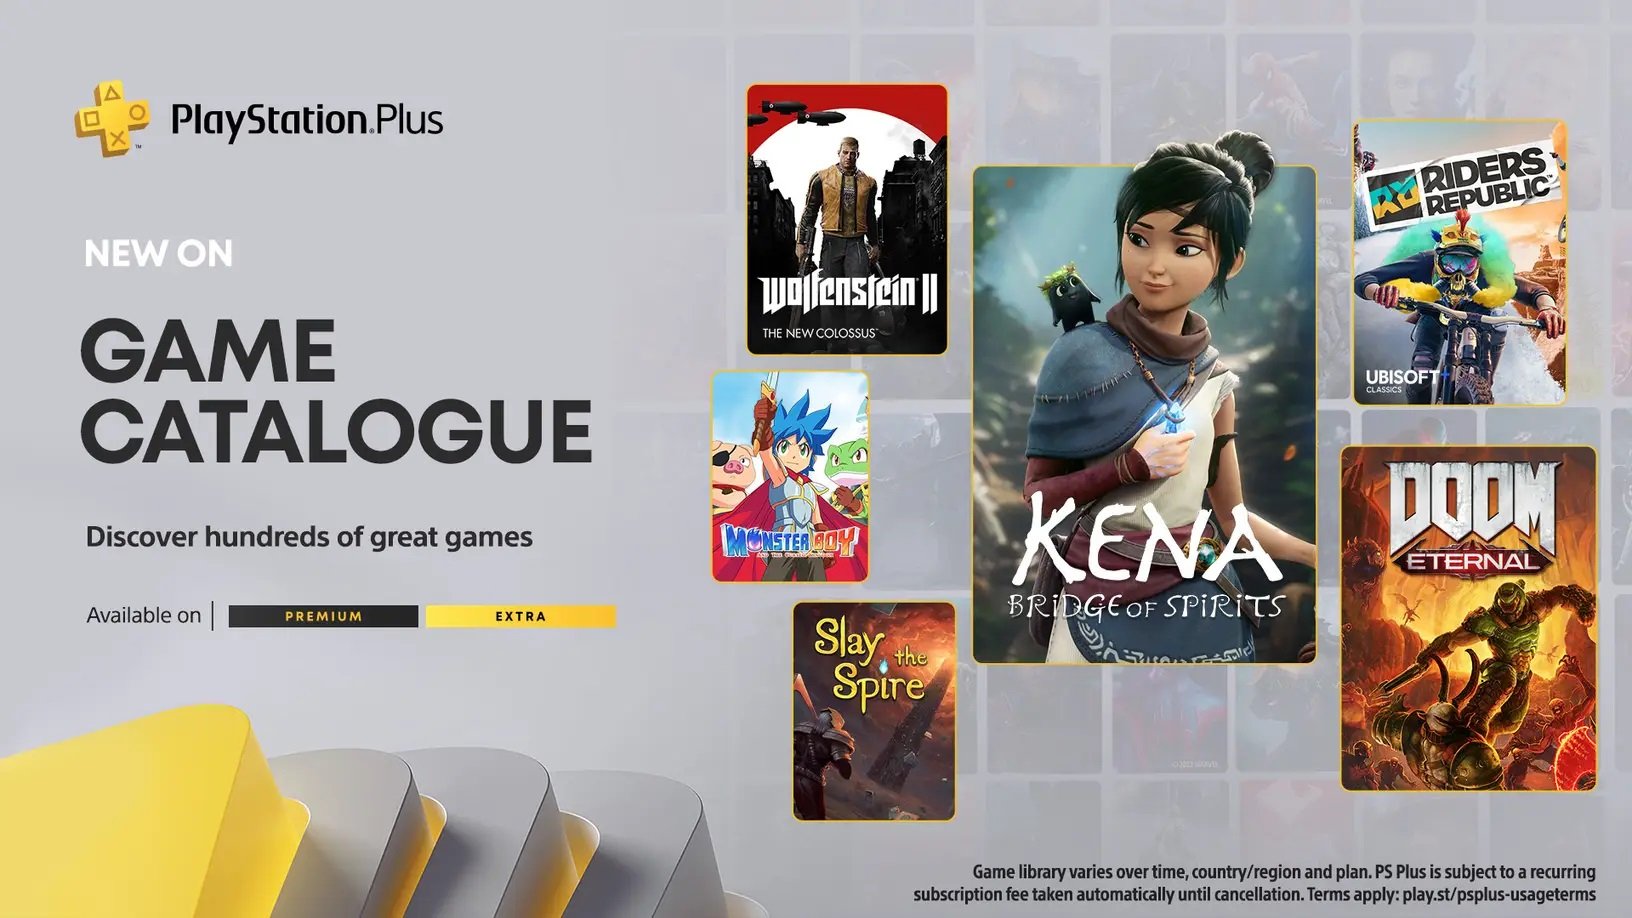 April’s PlayStation Plus Game Catalogue and Classics titles are out now